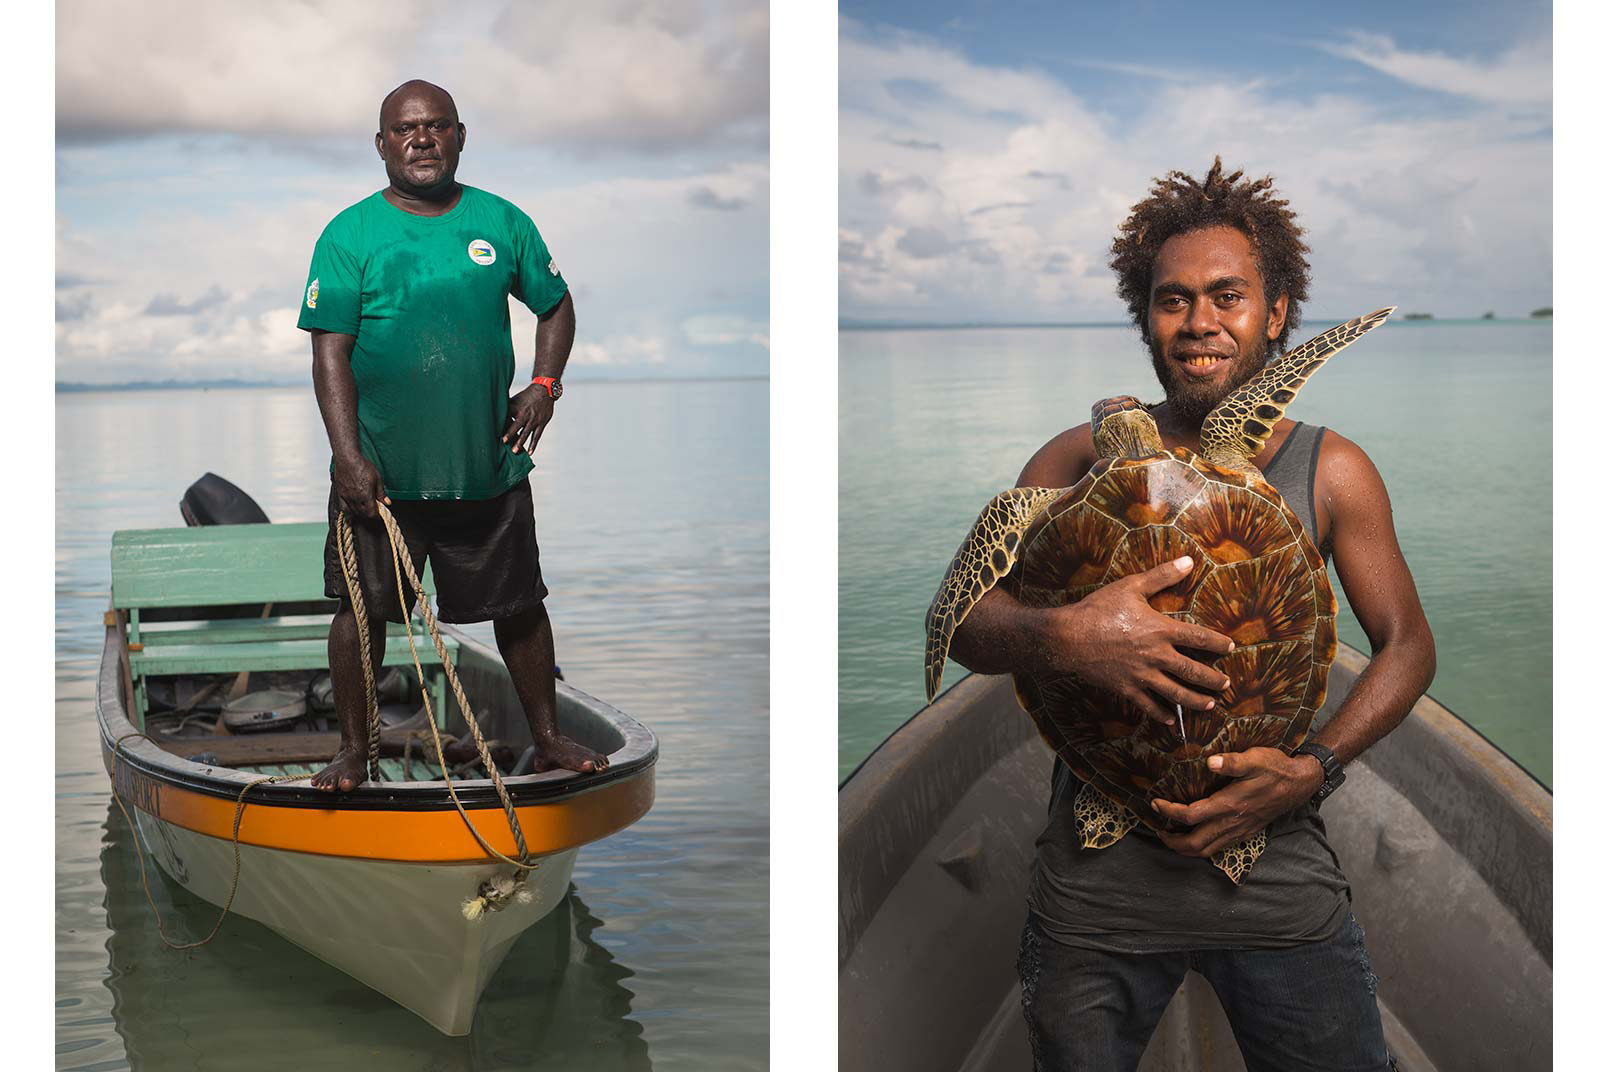 The program hires several local rangers who keep tabs on the green turtle population and help Hamilton track the hawksbill turtles. Led by John Pita (left), the station’s environmental coordinator, rangers, like Leslie Rubaha (right), catch juvenile green sea turtles by diving to capture them in a shallow lagoon. “I’m sure that it’s skills these guys have been using for generations to catch turtles,” Calver says, “but now they’re just using them to do science work with.” Photo © Tim Calver